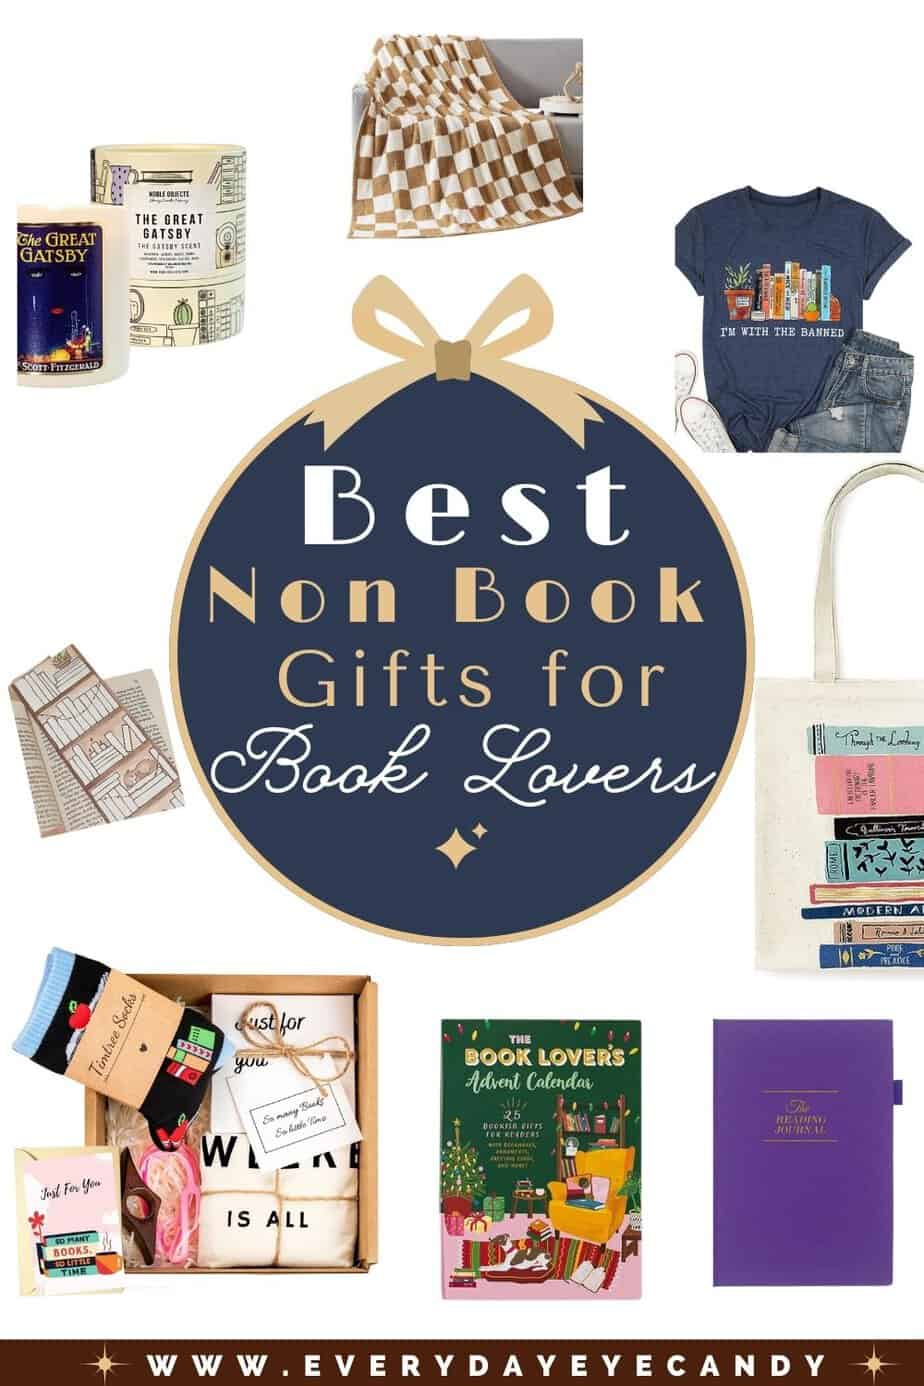 89 Awesome Gift Ideas For Bookworms (Besides An Actual Book) | Bored Panda